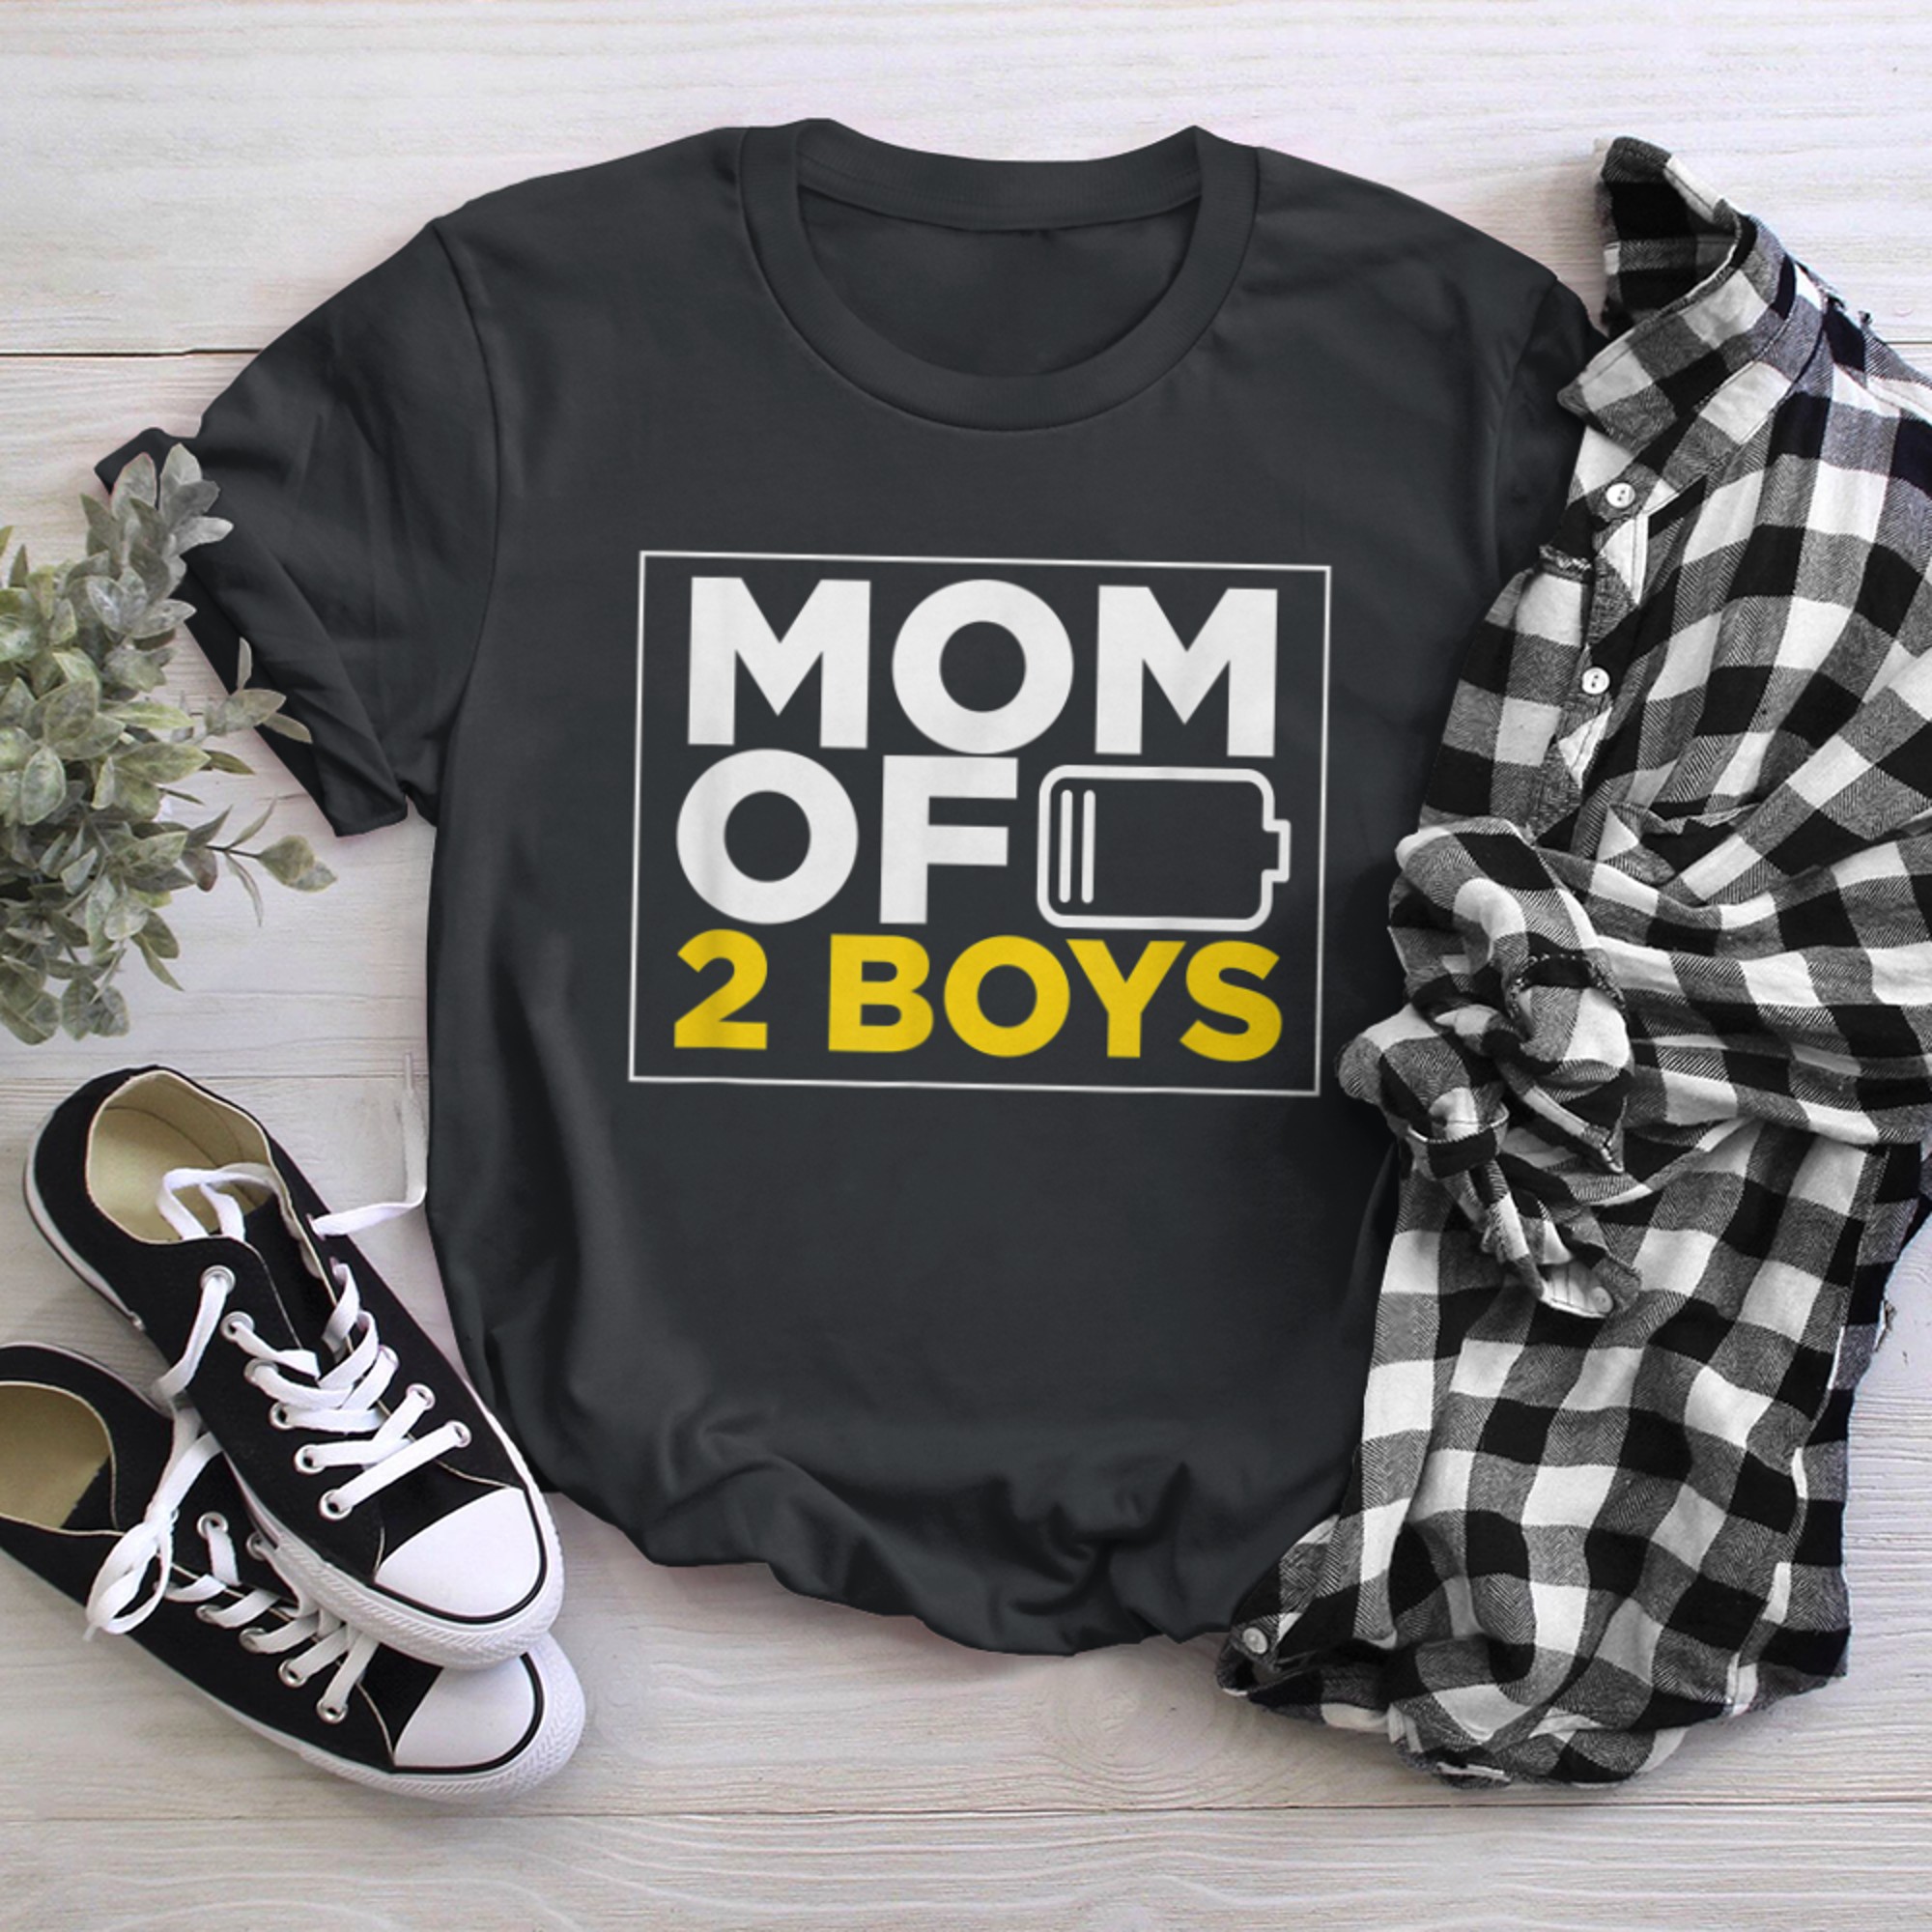 Mom of Mothers Day for Mother Son t-shirt black